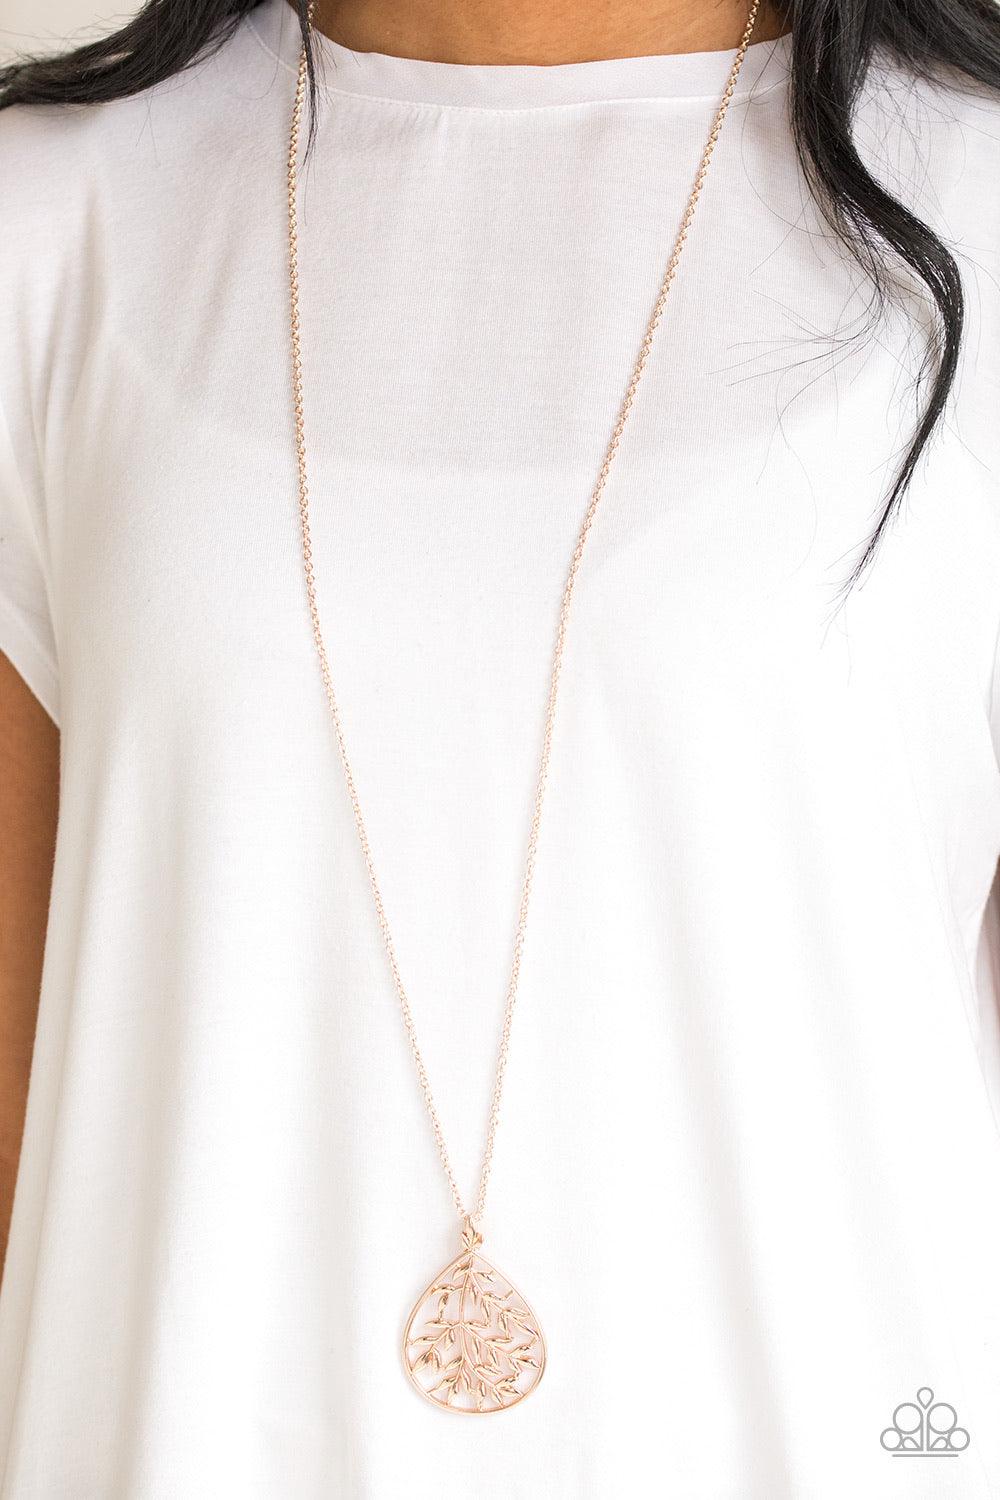 Paparazzi Accessories BOUGH Down - Rose Gold Leafy rose gold branches fan out across a glistening rose gold teardrop frame, creating a whimsical pendant at the bottom of a lengthened rose gold chain. Features an adjustable clasp closure. Jewelry